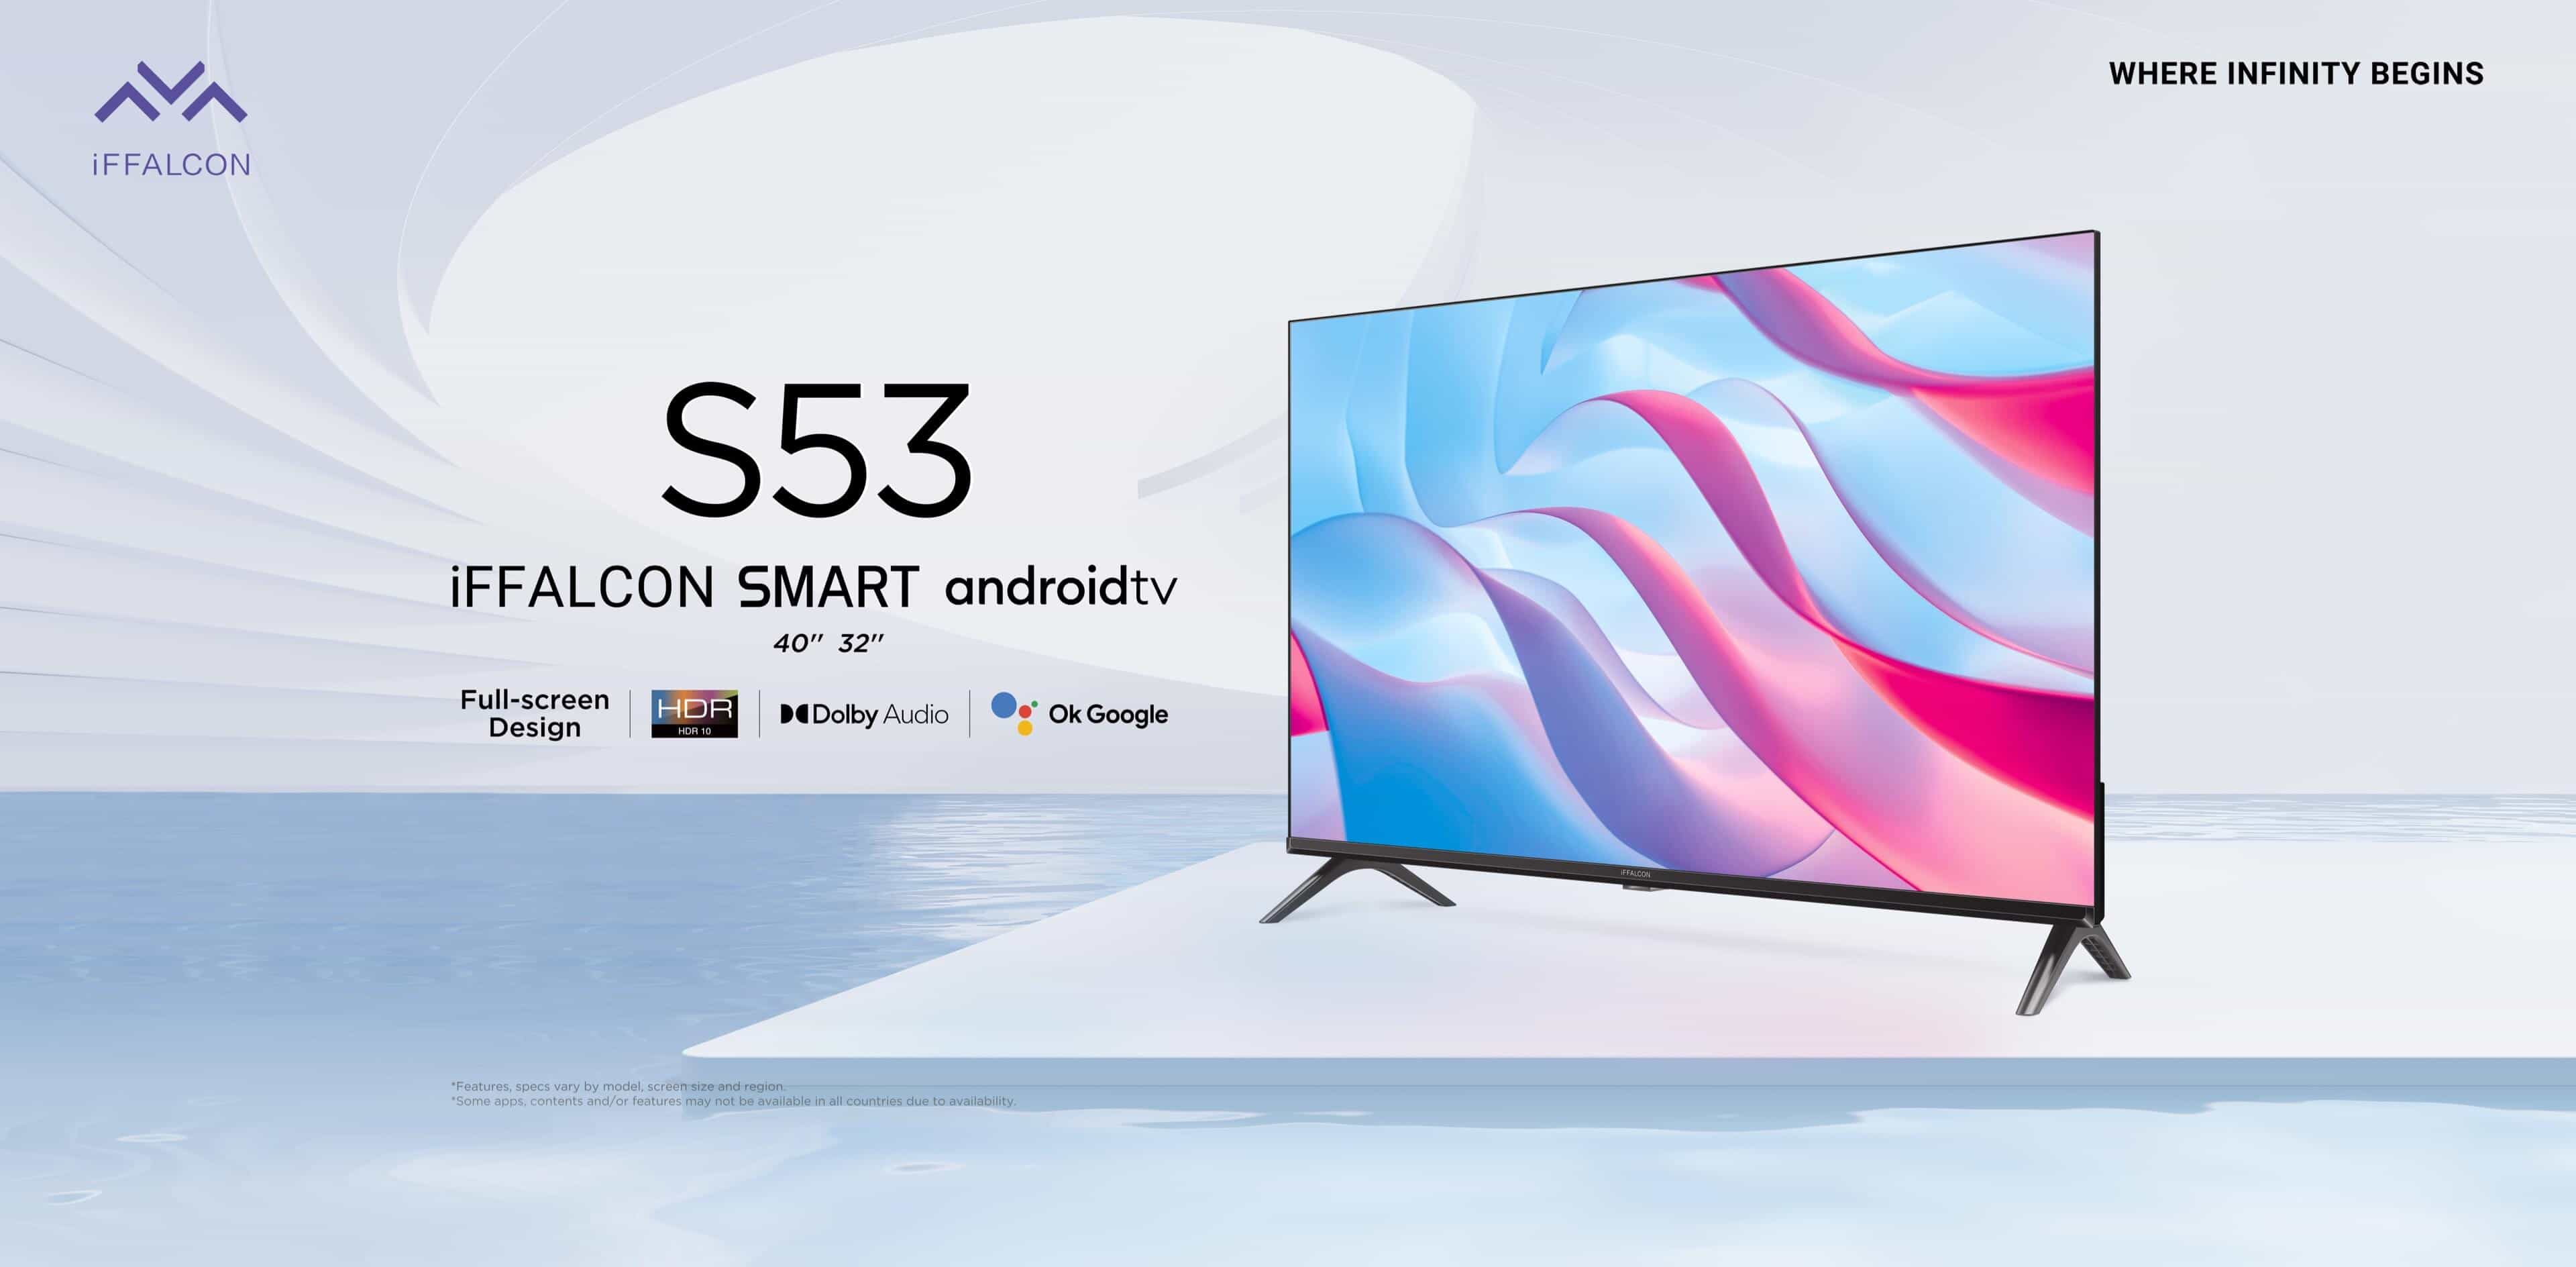 iFFALCON S53 Smart Android TV